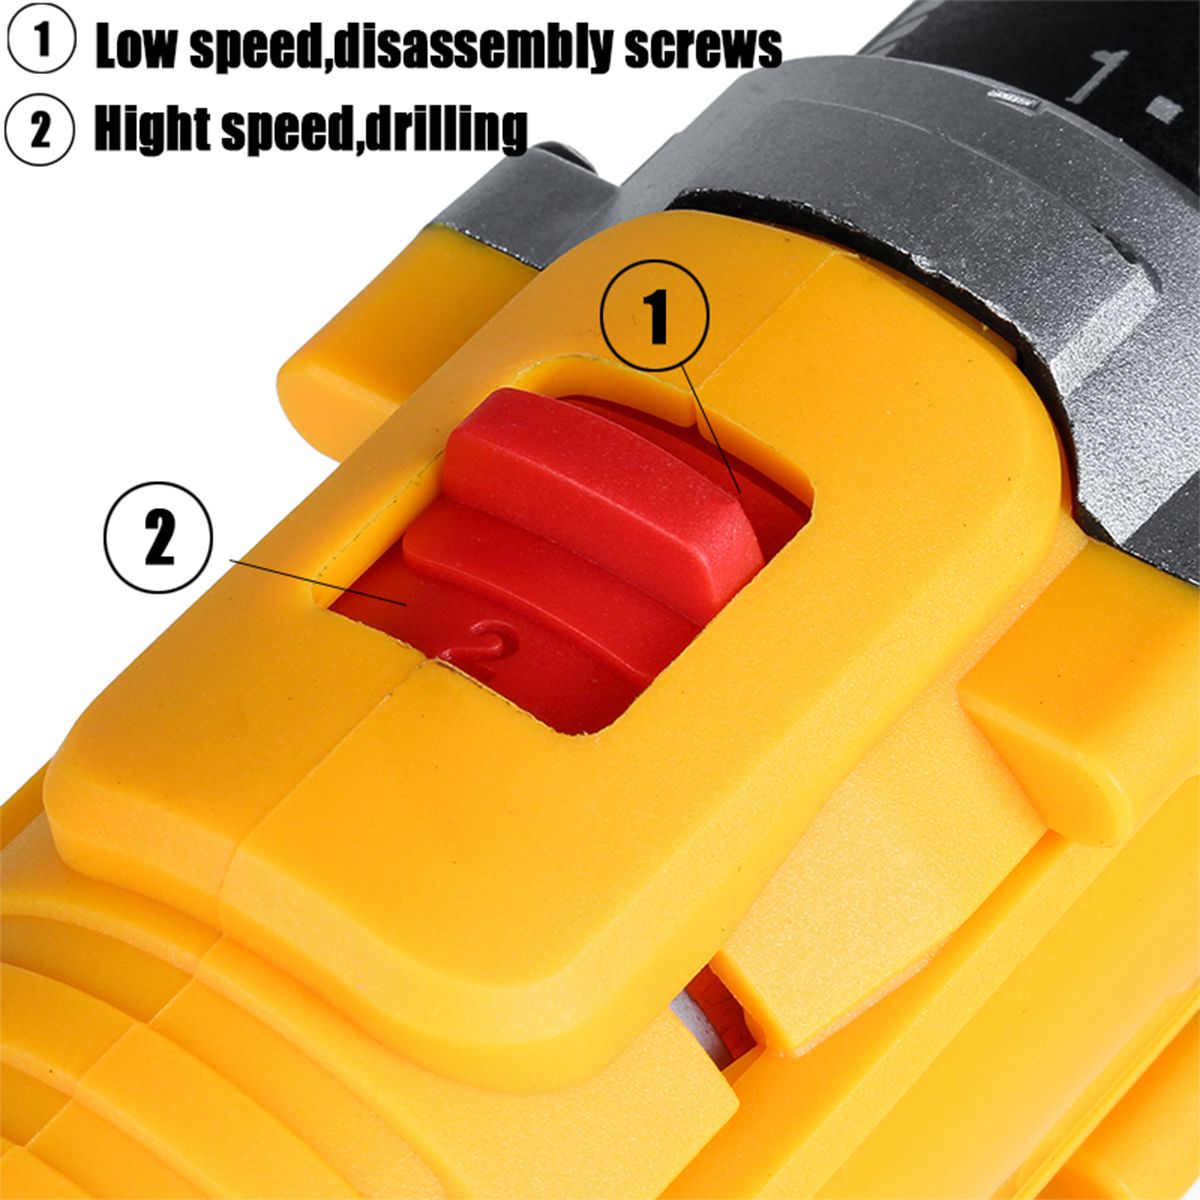 48V-2-Speed-Electric-Drill-Li-Ion-Rechargeable-Power-Hand-Drill-18-Gear-With-LED-Working-Light-Forwa-1605260